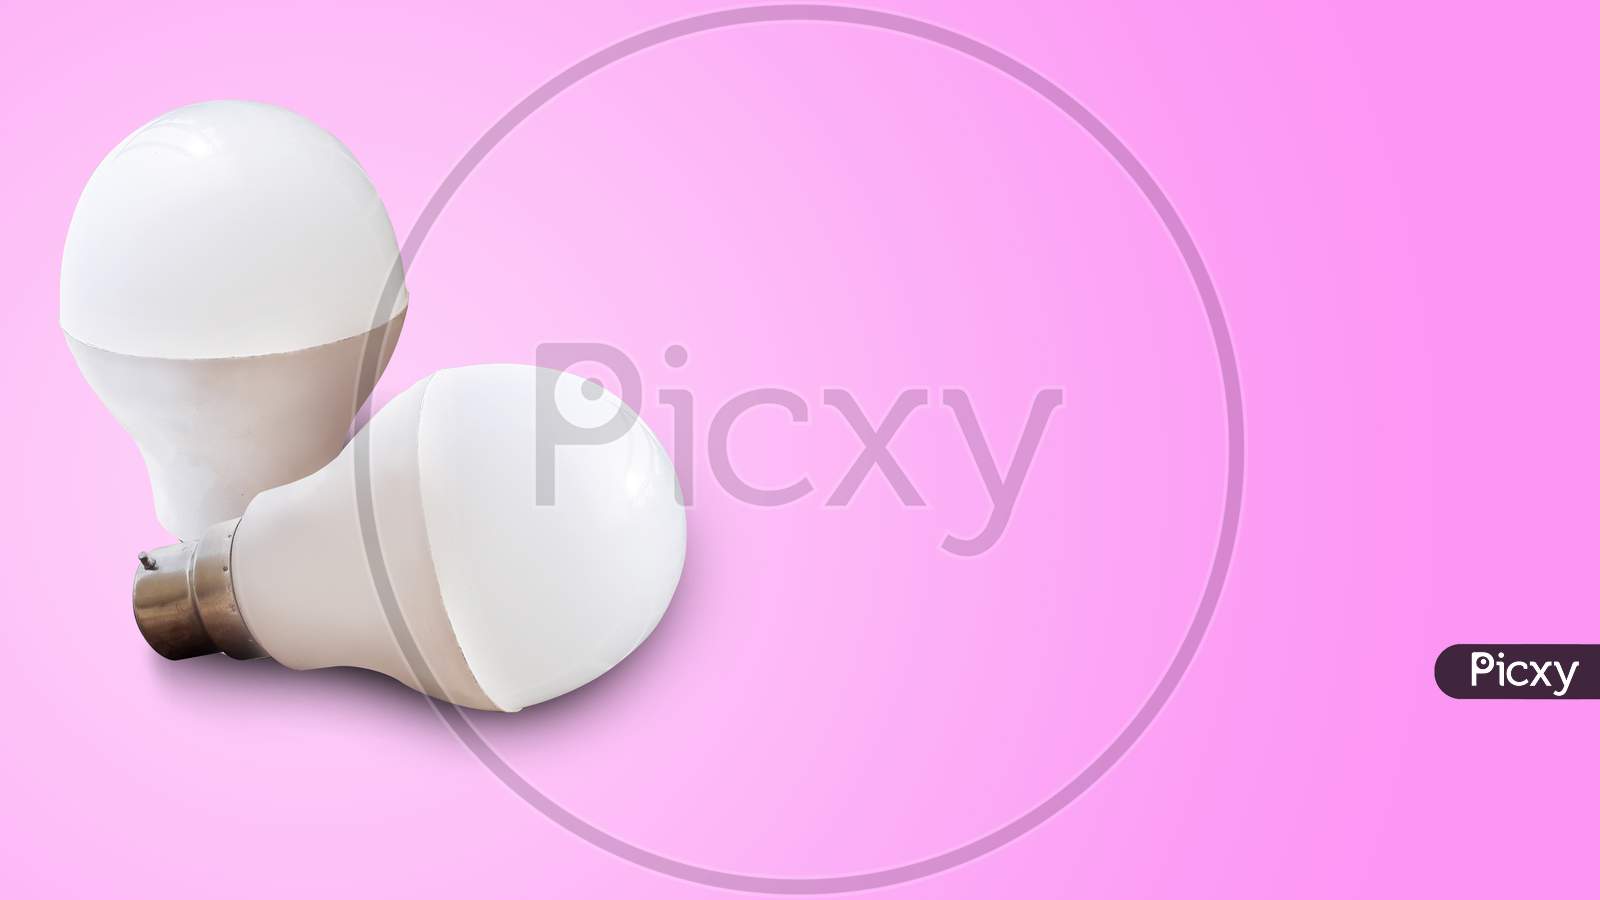 White LED bulb non glowing isolated image in pink background